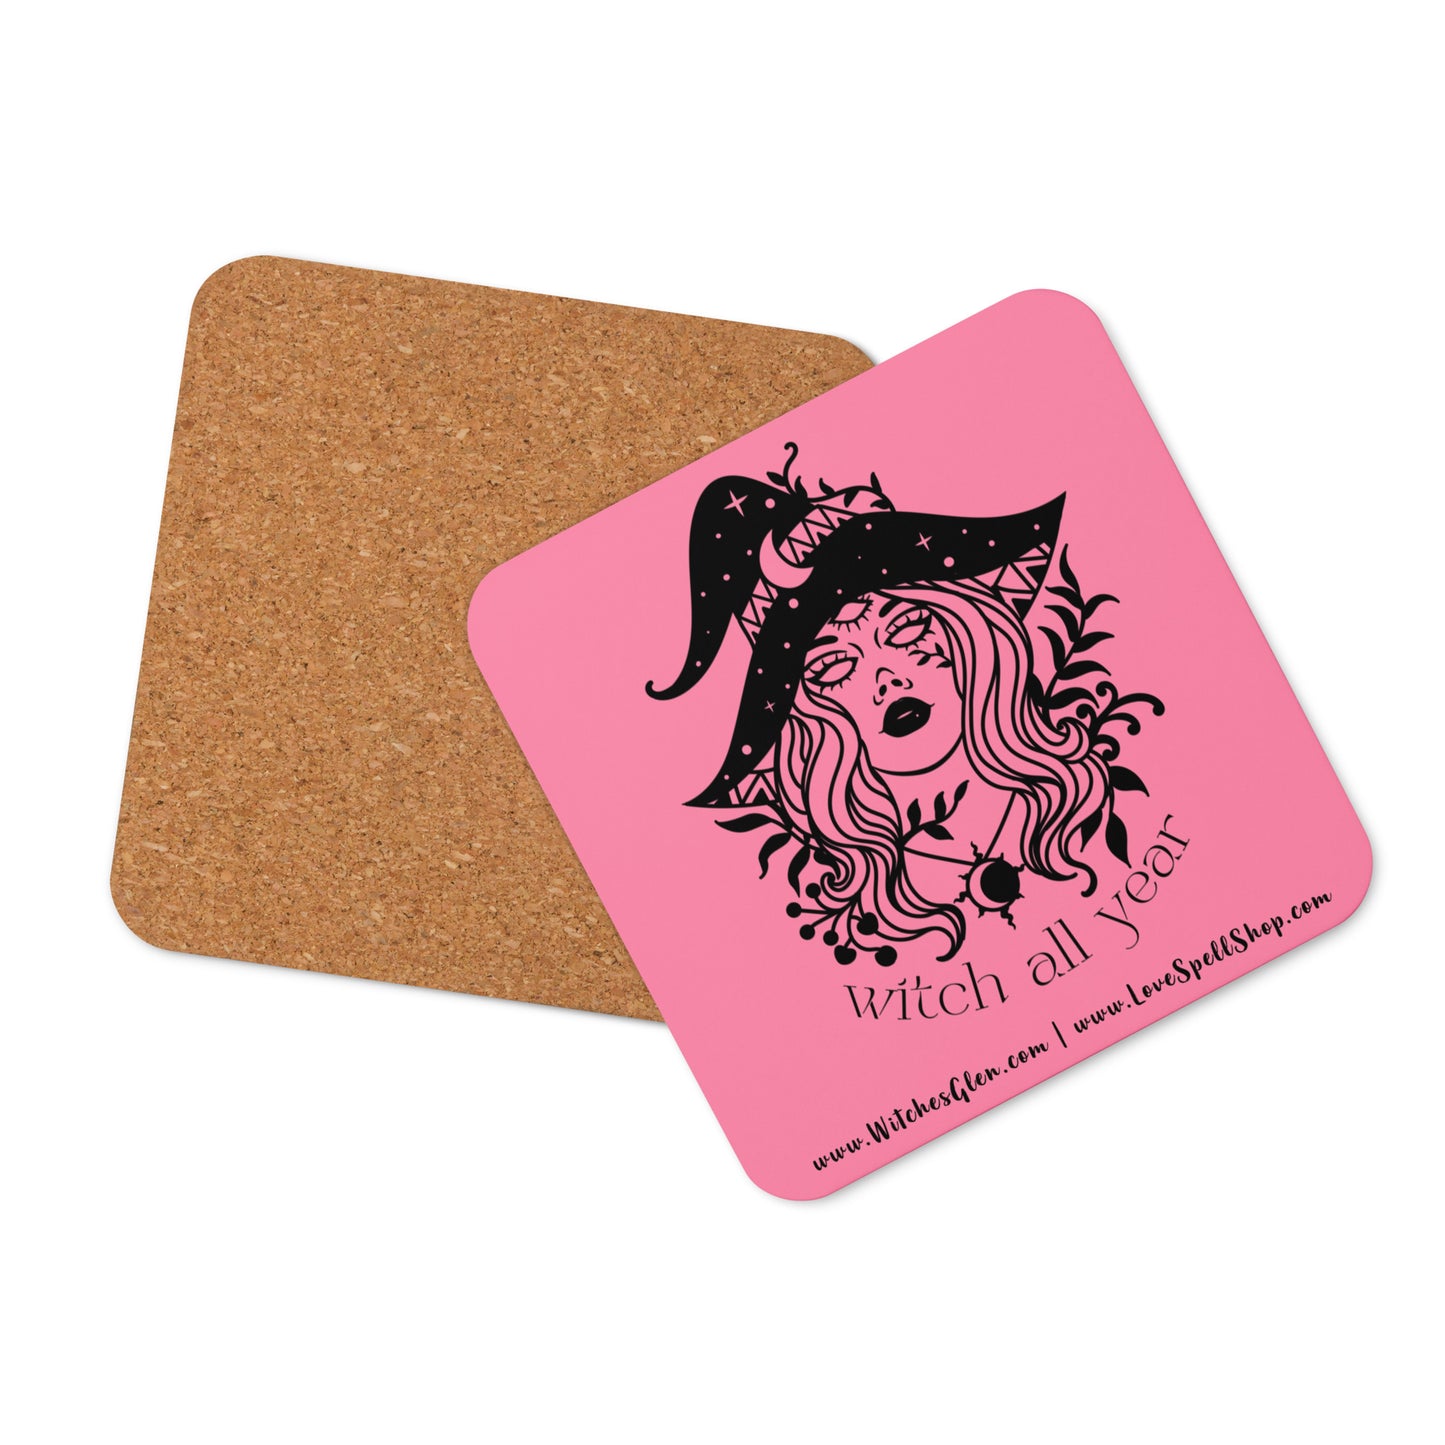 Cork-back Coaster: Witch All Year (tickle me pink)